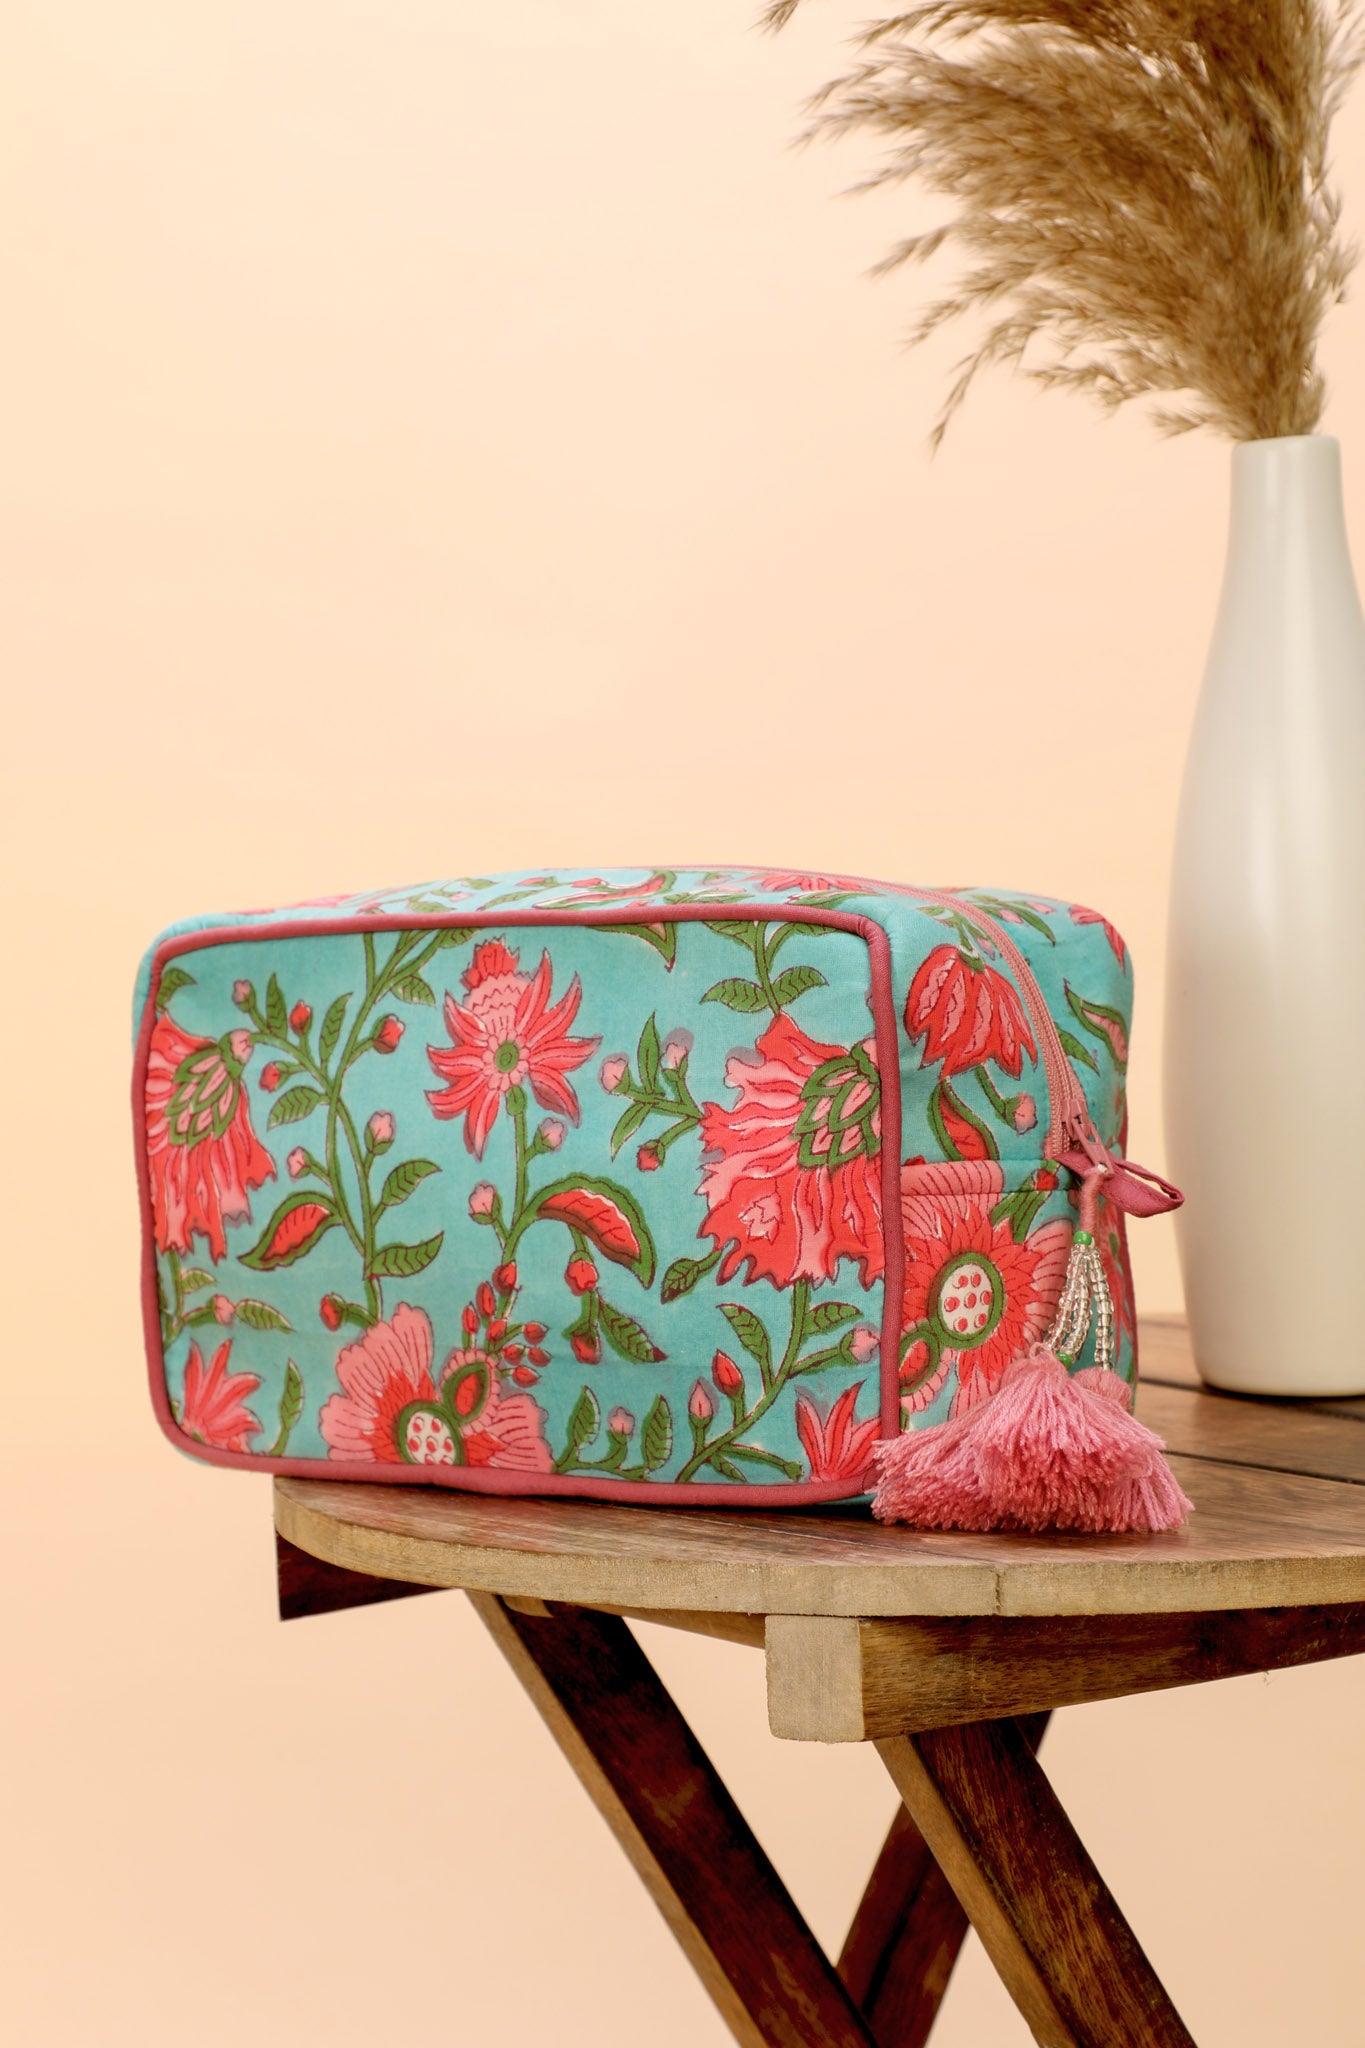 Roze Pouch - Block Printed